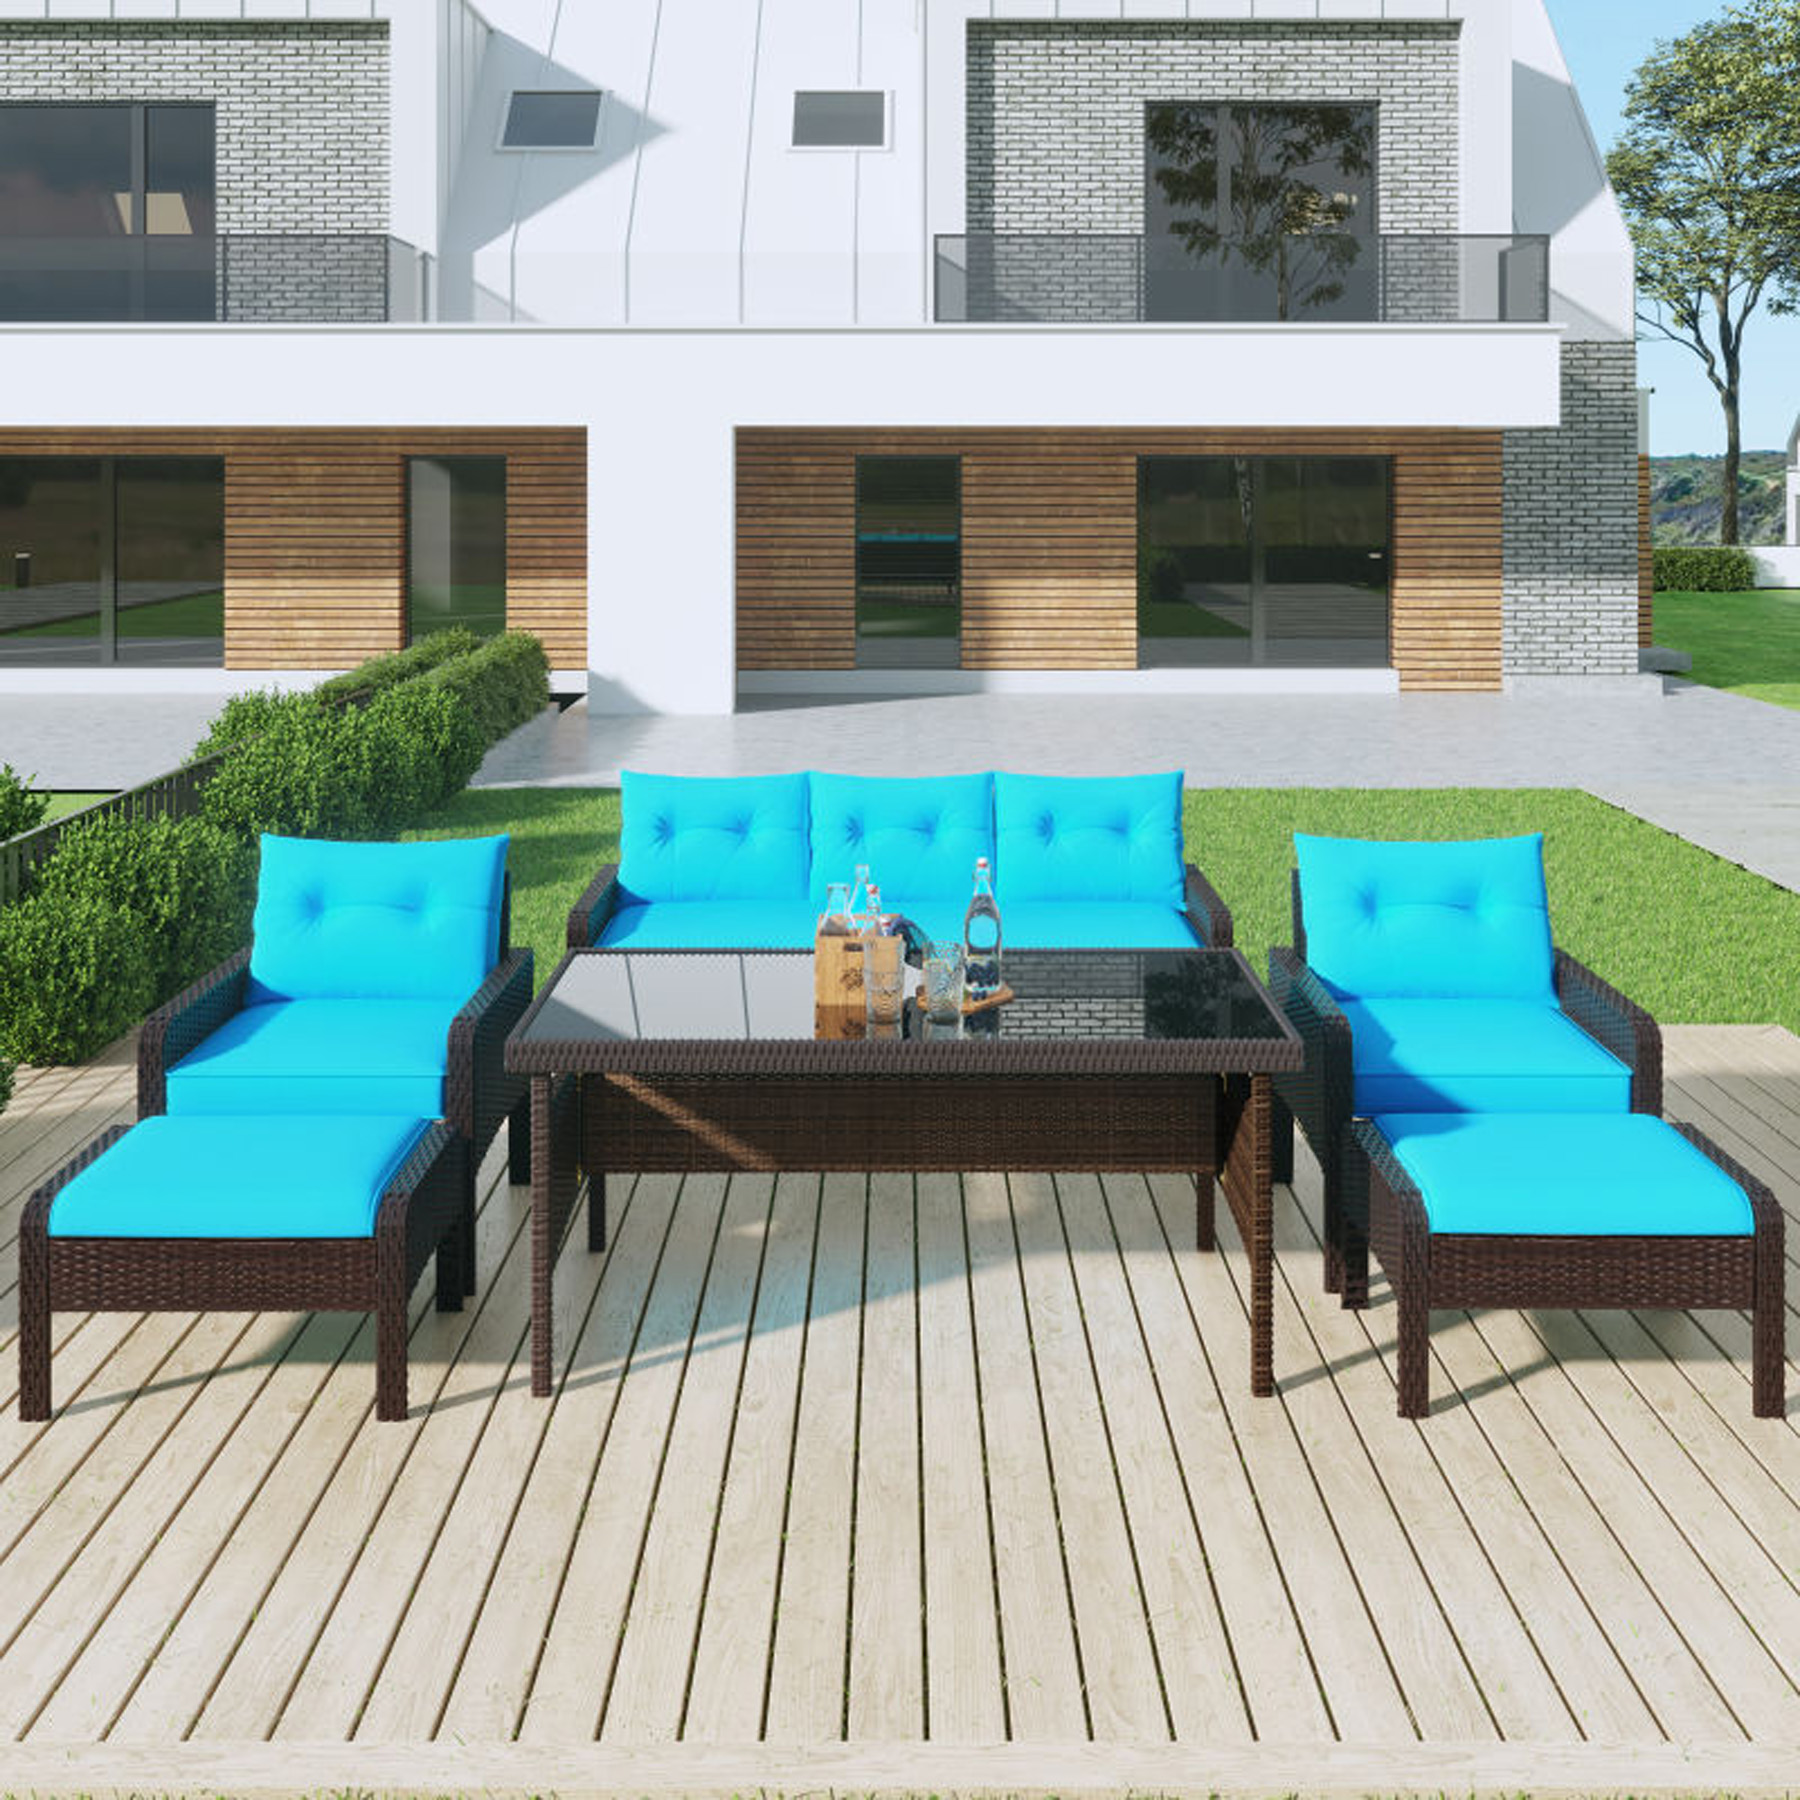 SYNGAR 6 Pieces Patio Furniture Sets, Outdoor Lounge Chair Set Conversation Set with Glass Coffee Table, Sofa and Ottoman, Outdoor Table and Chairs for Porch Lawn Garden Backyard, Brown, LJ3717 - image 1 of 10